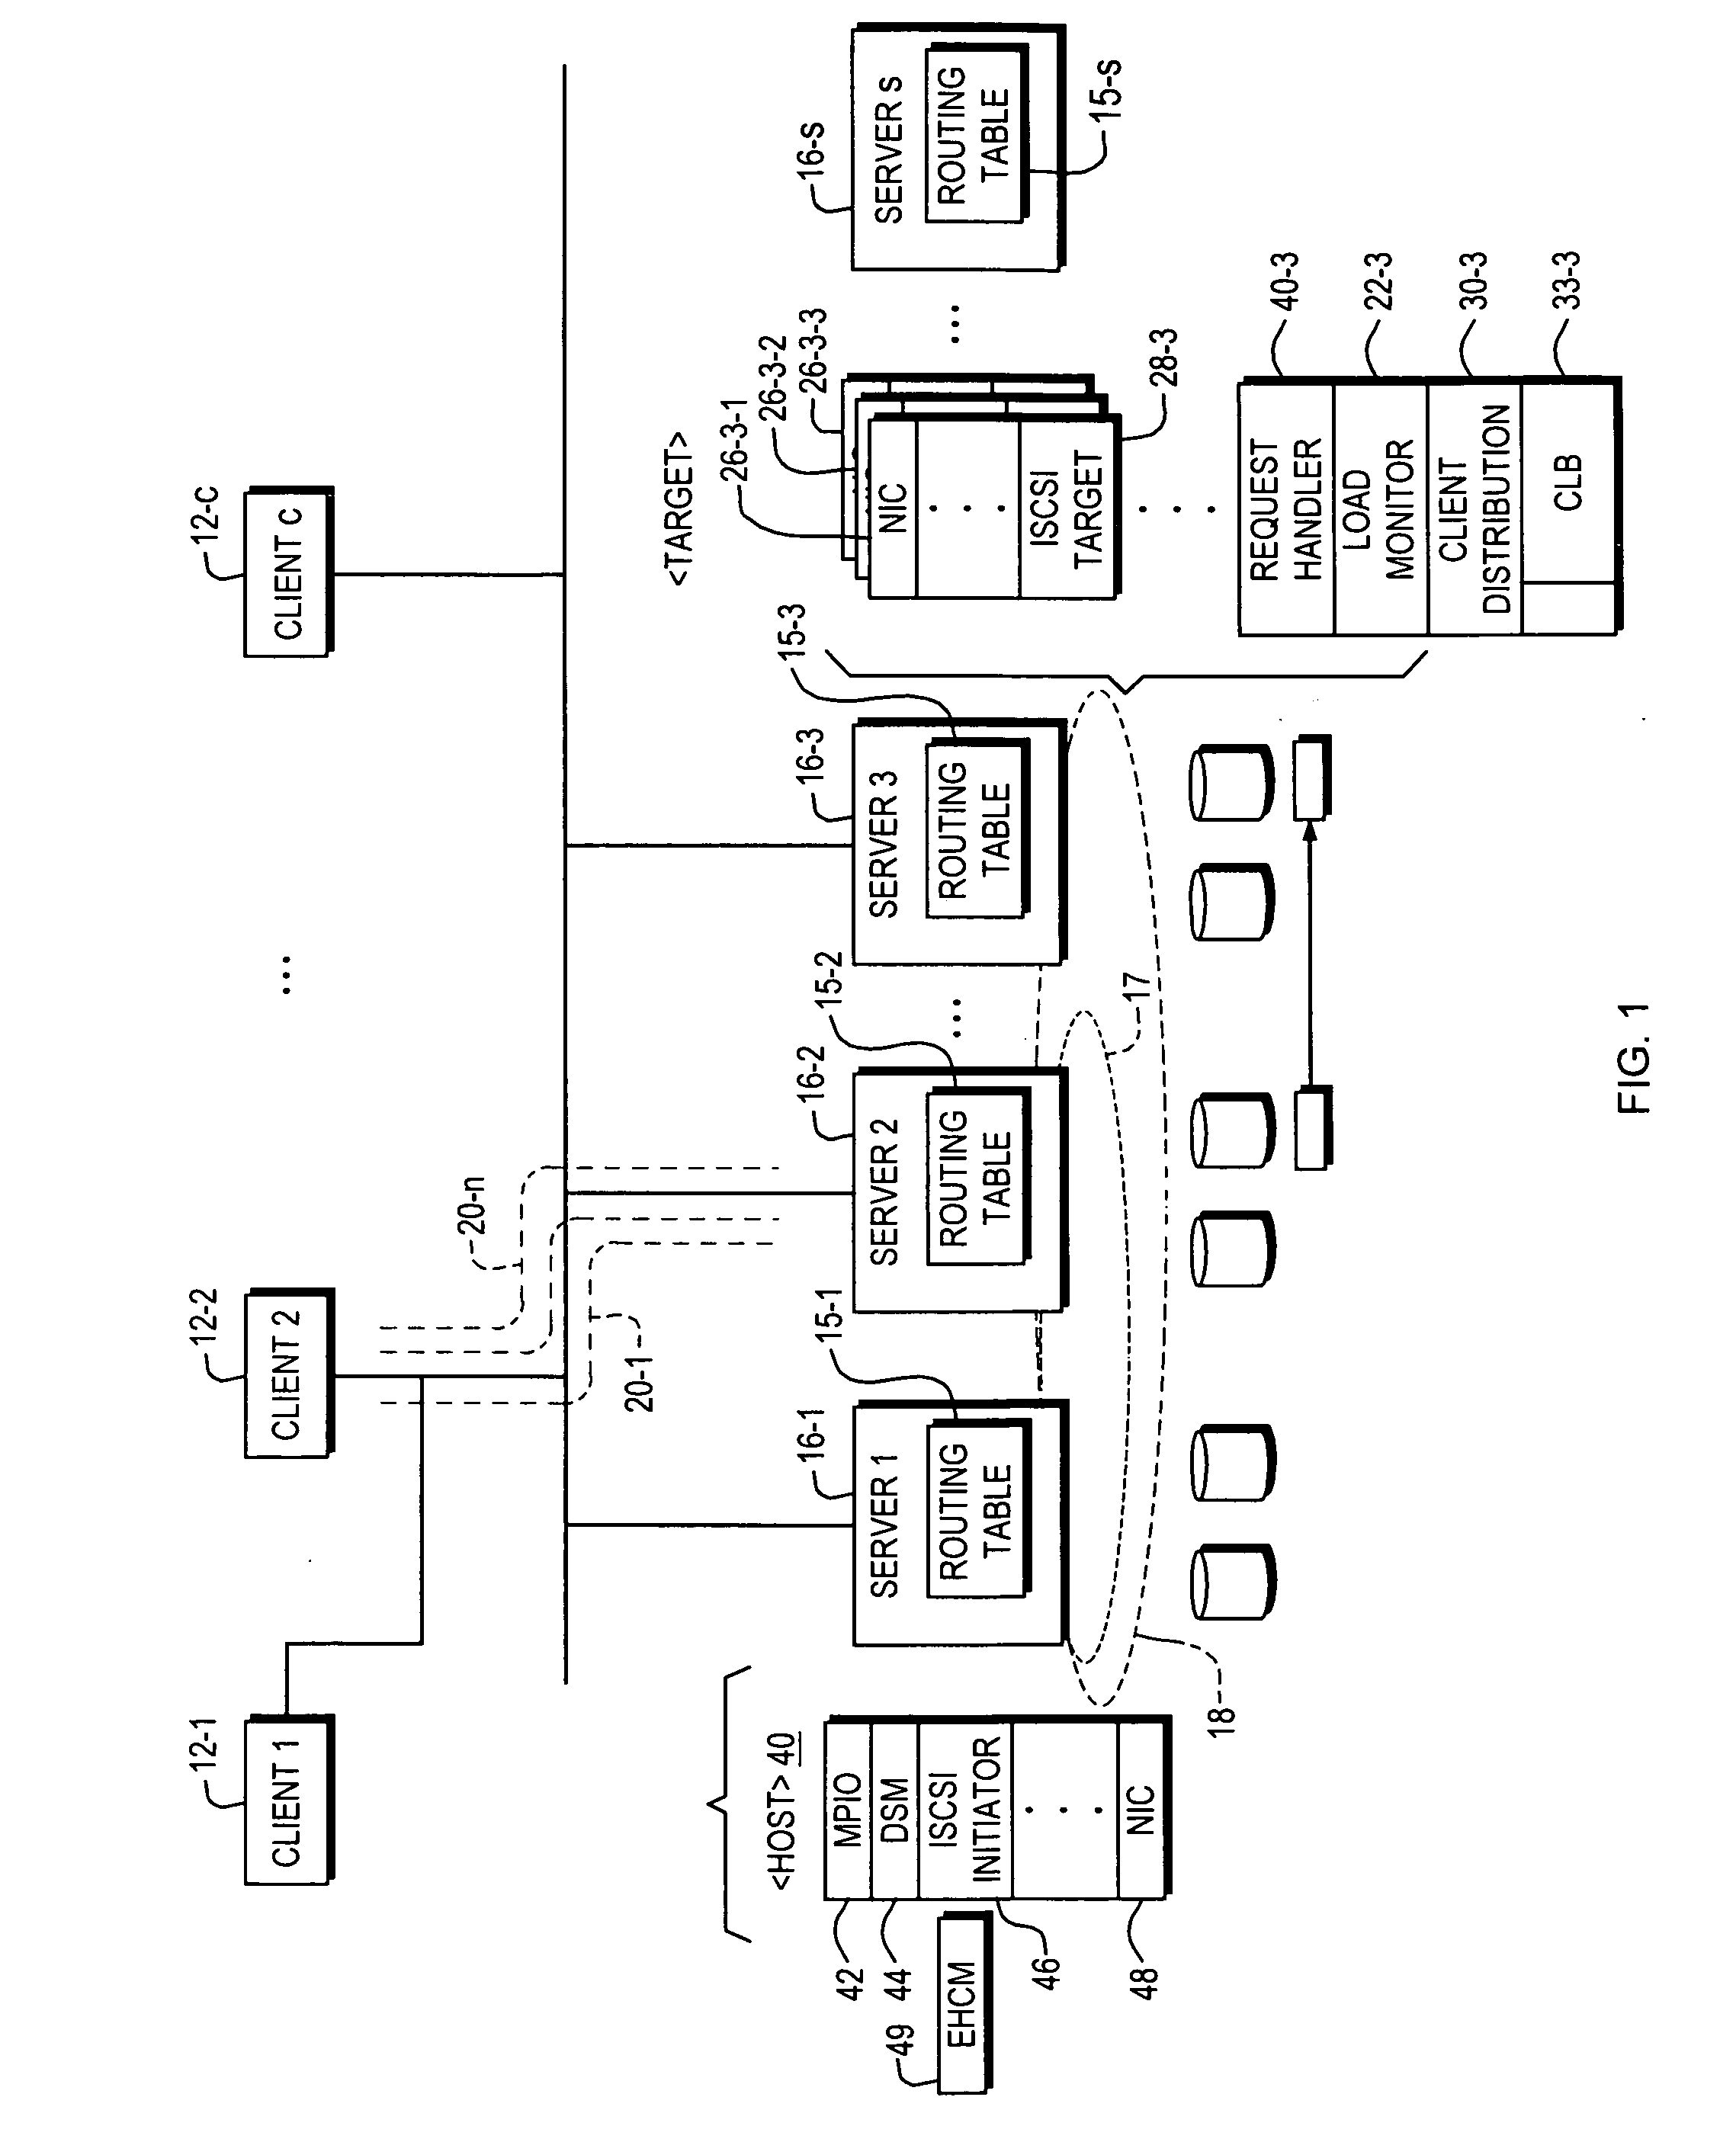 Storage area network with target side recognition and routing table upload